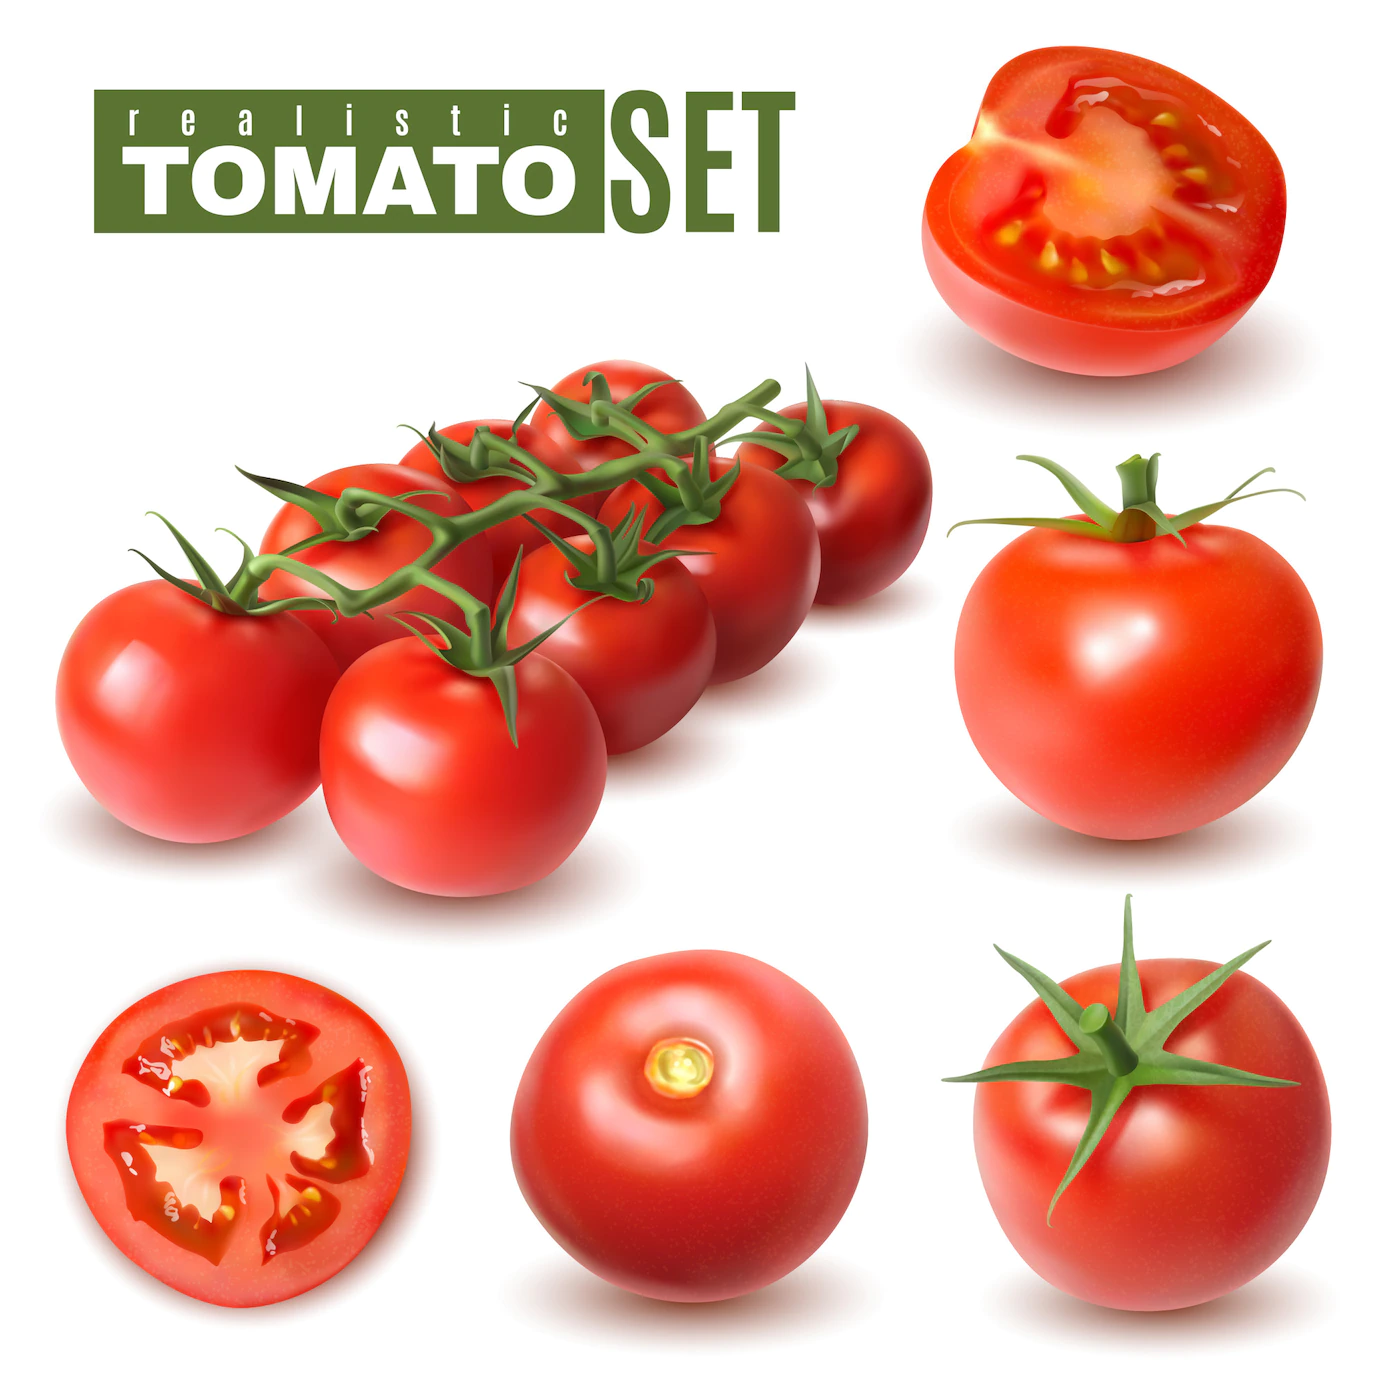 Realistic Tomato Set Isolated Images With Single Tomato Fruits Groups With Shadows Text 1284 29399